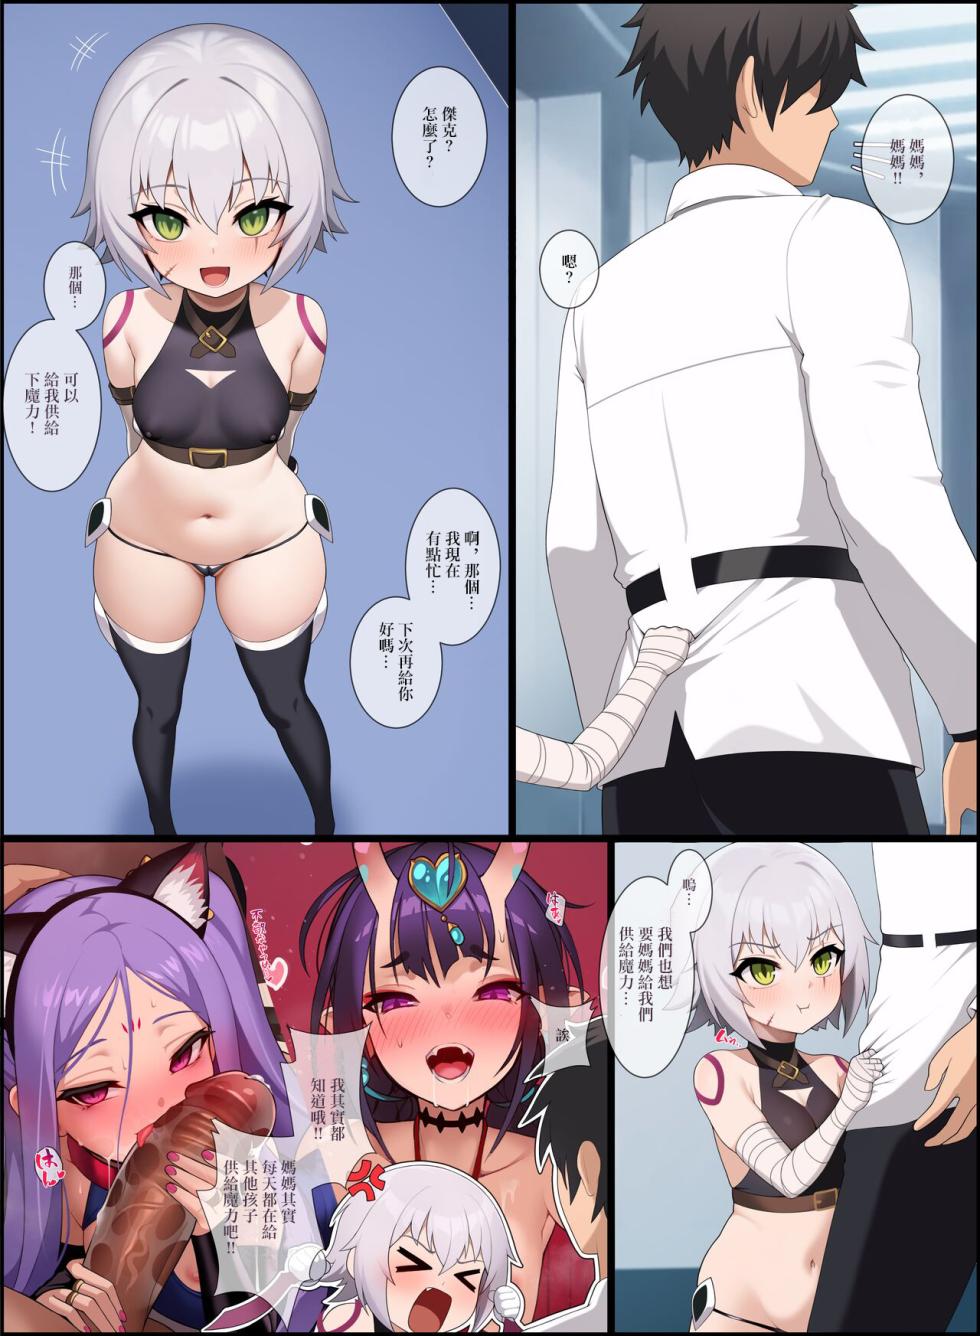 [Pergrim] Jack (Fate/Grand Order) [Chinese] [Decensored] - Page 1